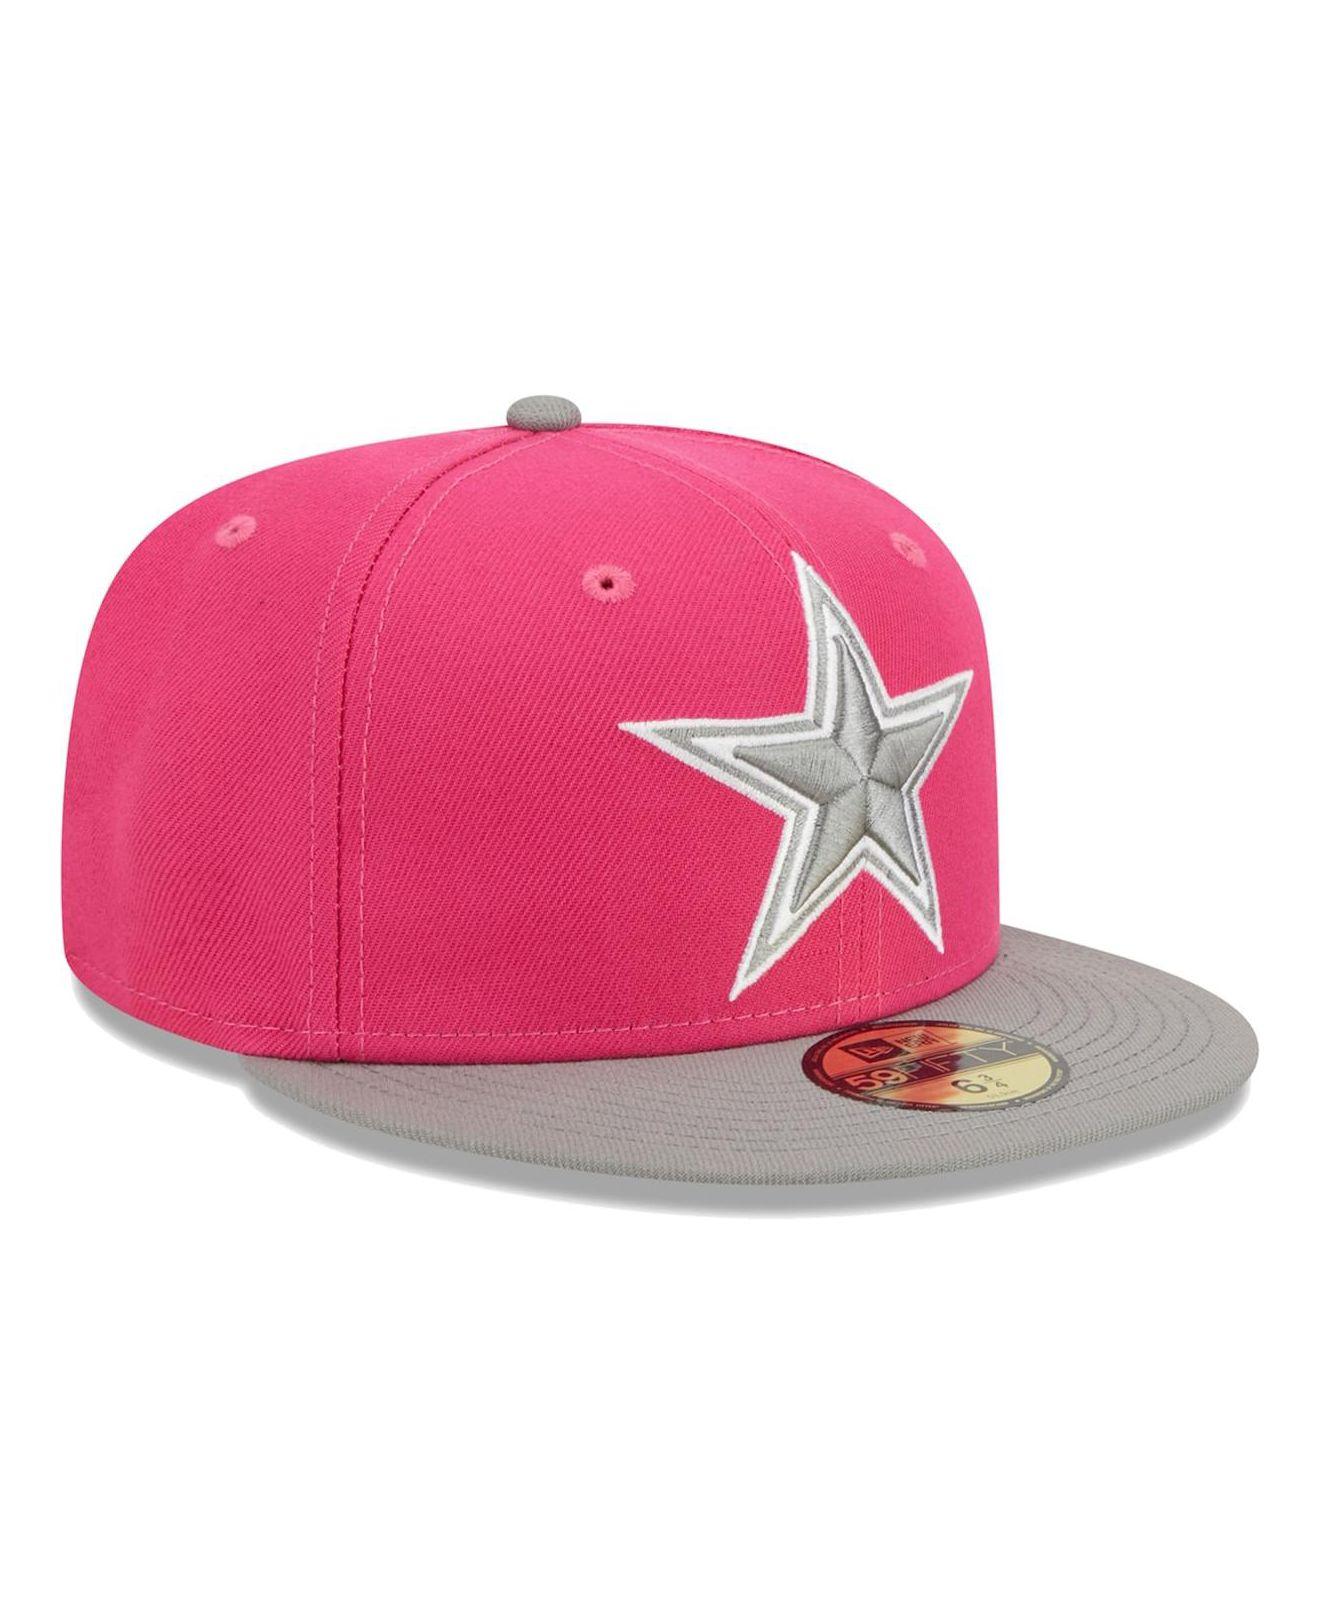 red dallas cowboys fitted hat